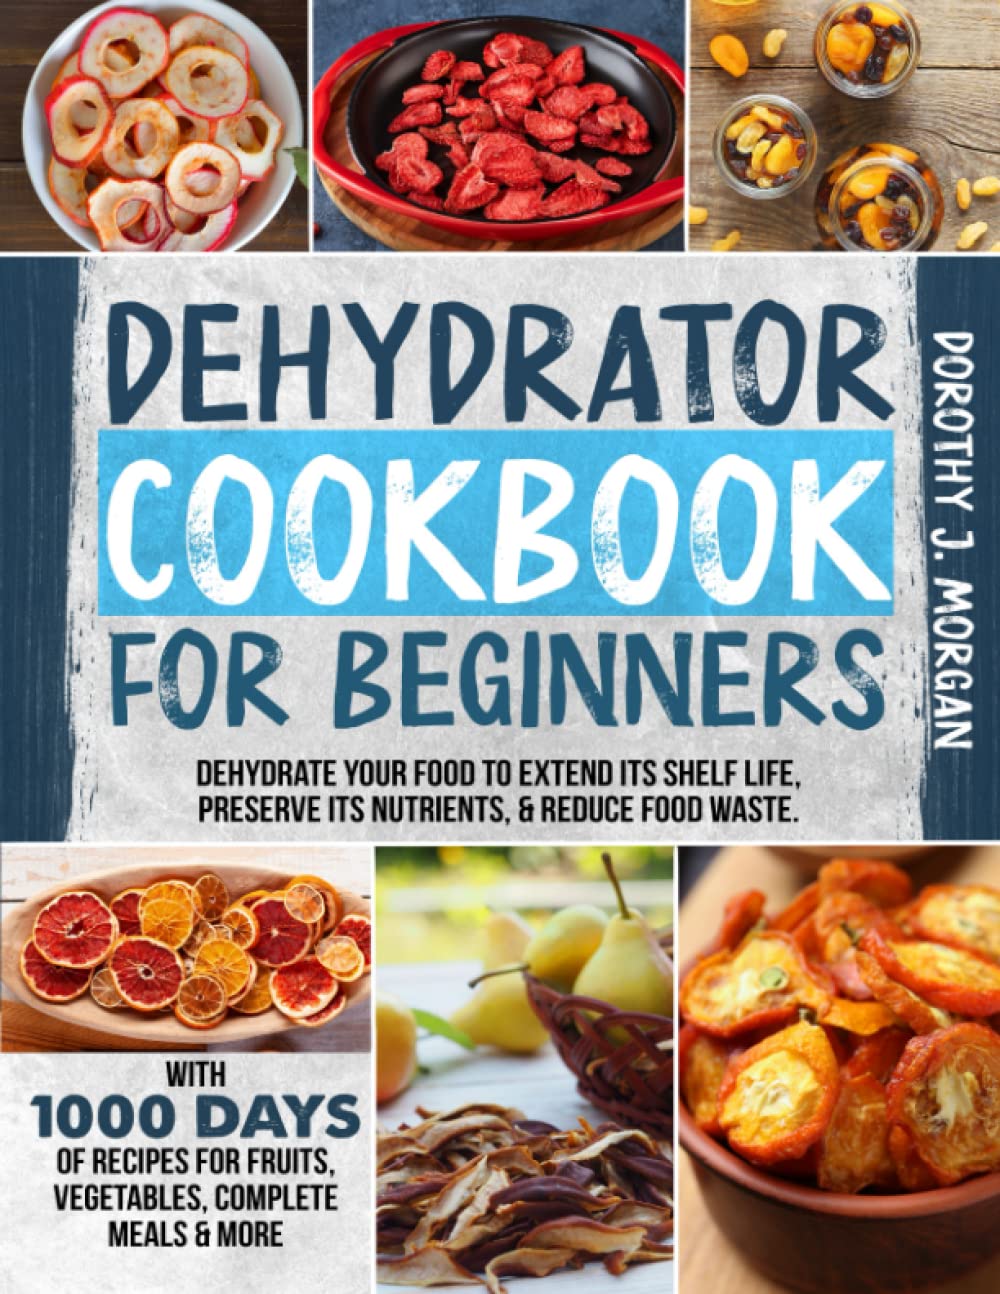 DEHYDRATOR COOKBOOK FOR BEGINNERS: Dehydrate Your Food To Extend Its Shelf Life, Preserve Its Nutrients, & Reduce Food Waste. With 1000 Days Of Recipes For Fruits, Vegetables, Complete Meals & More